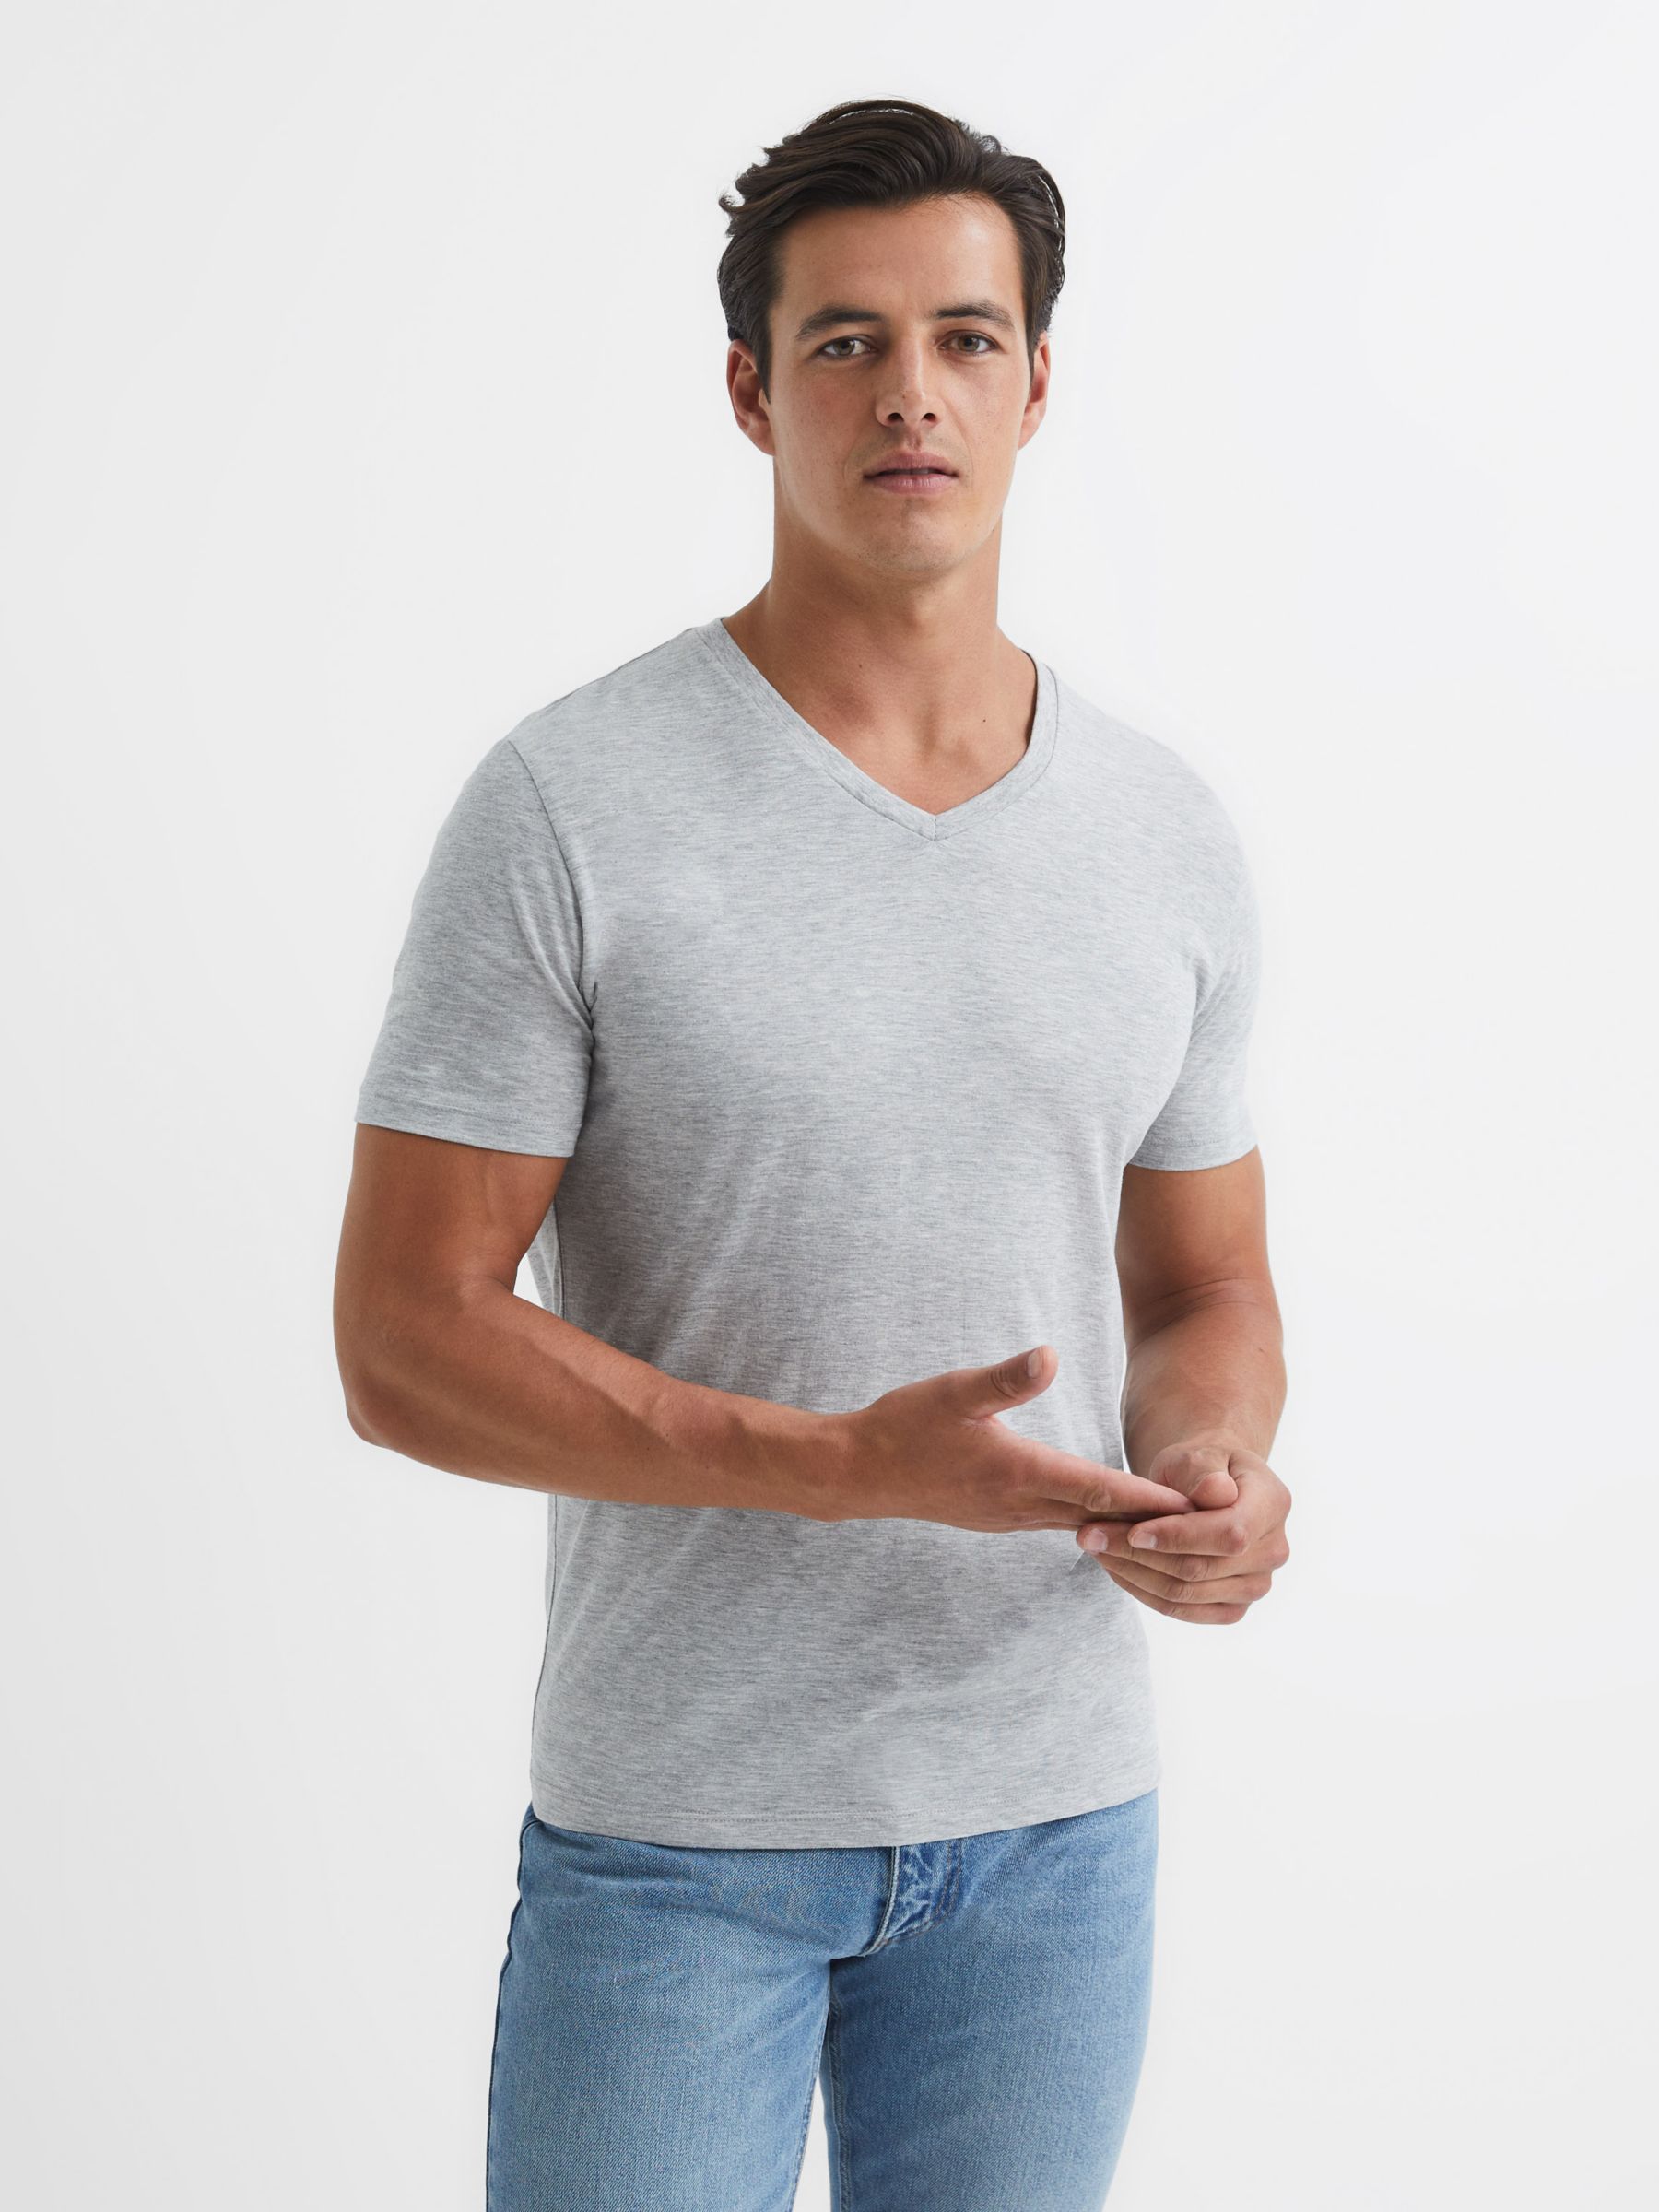 Under Armour Plus Tech v neck t-shirt in grey marl